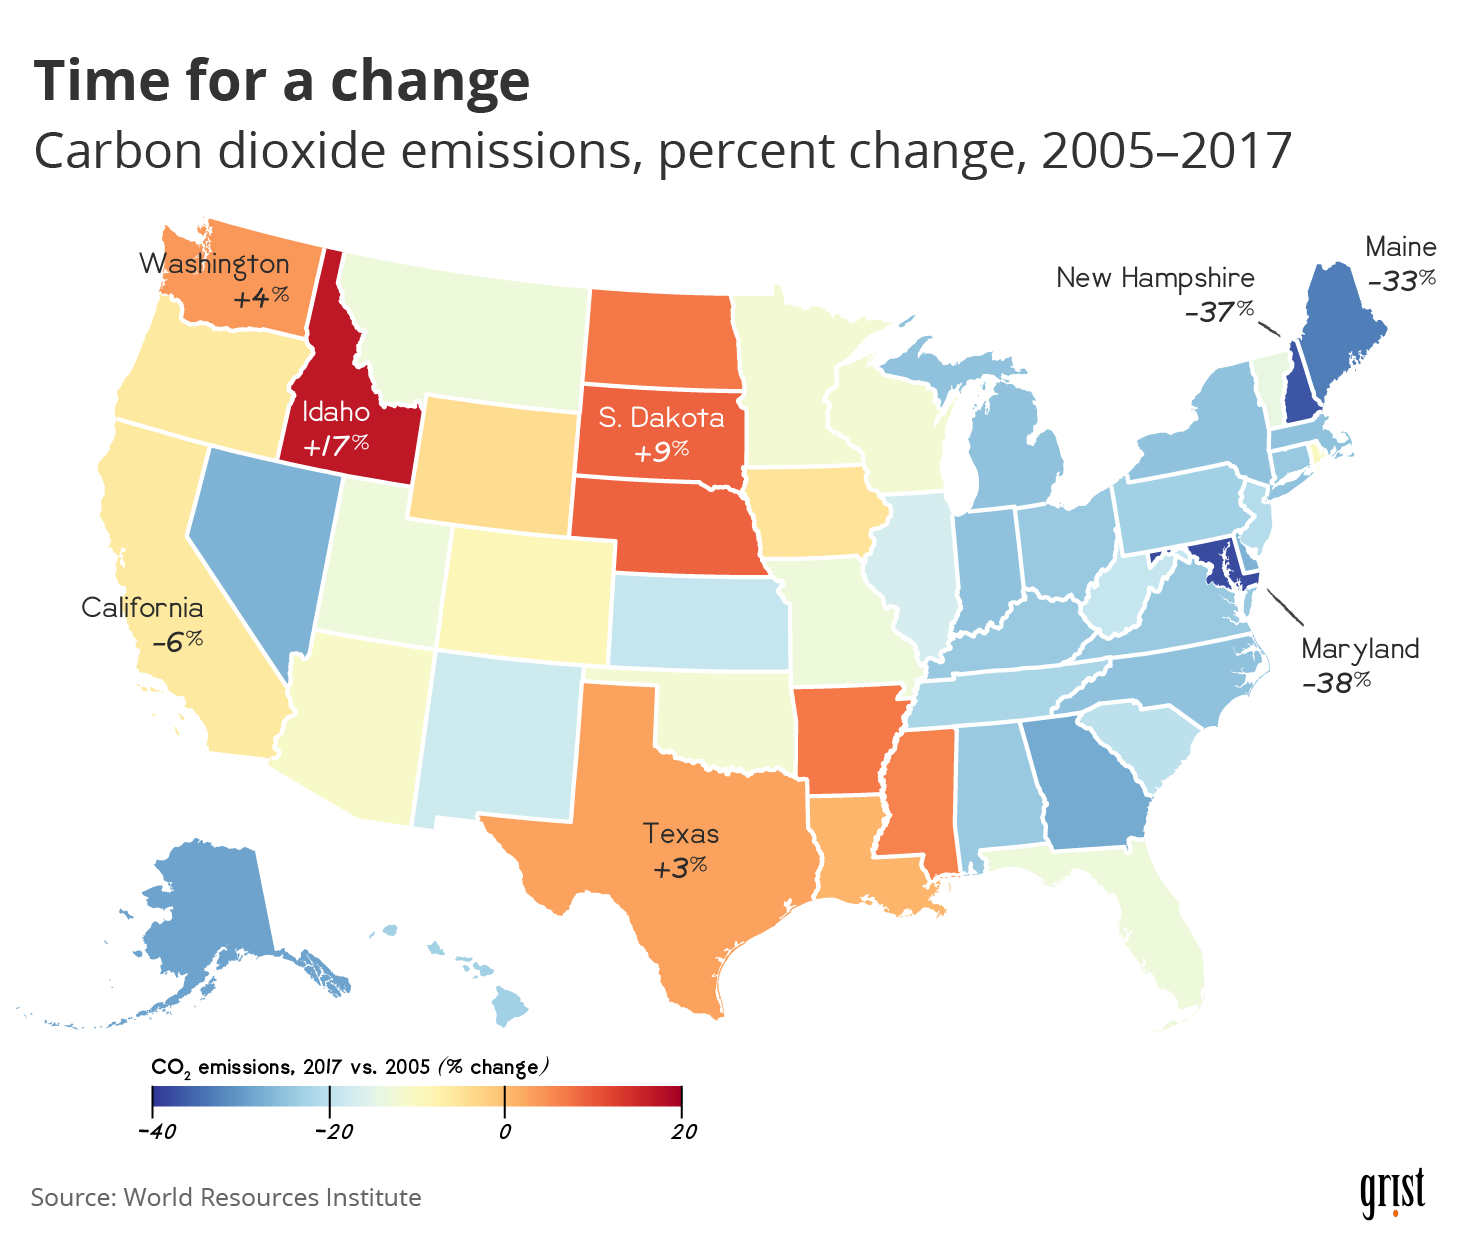 A map showing the change in CO2 emissions for U.S. states between 2005 and 2017. Maryland had the largest decrease (at 38%). Idaho had the largest increase (at 17%).